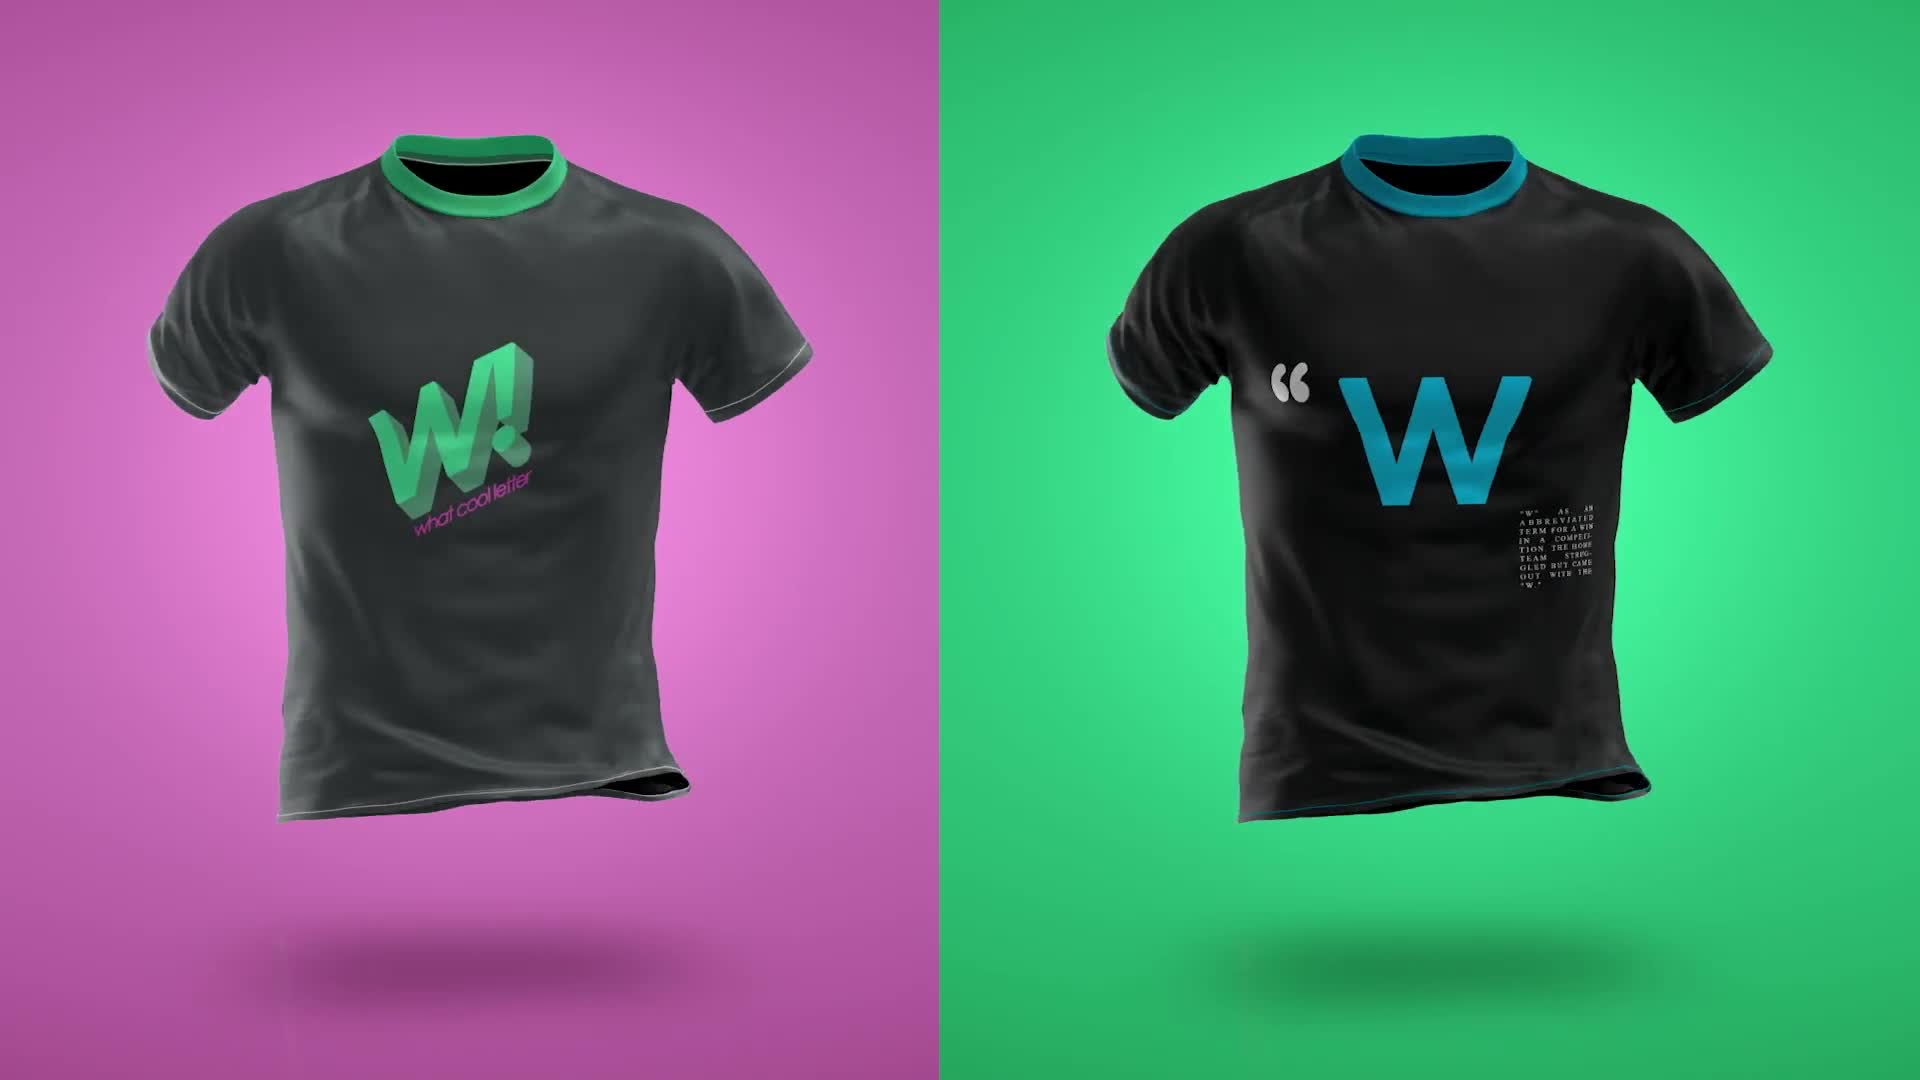 T shirt Mockup Template Animated Mockup PRO Videohive 32910482 Download Quick After Effects